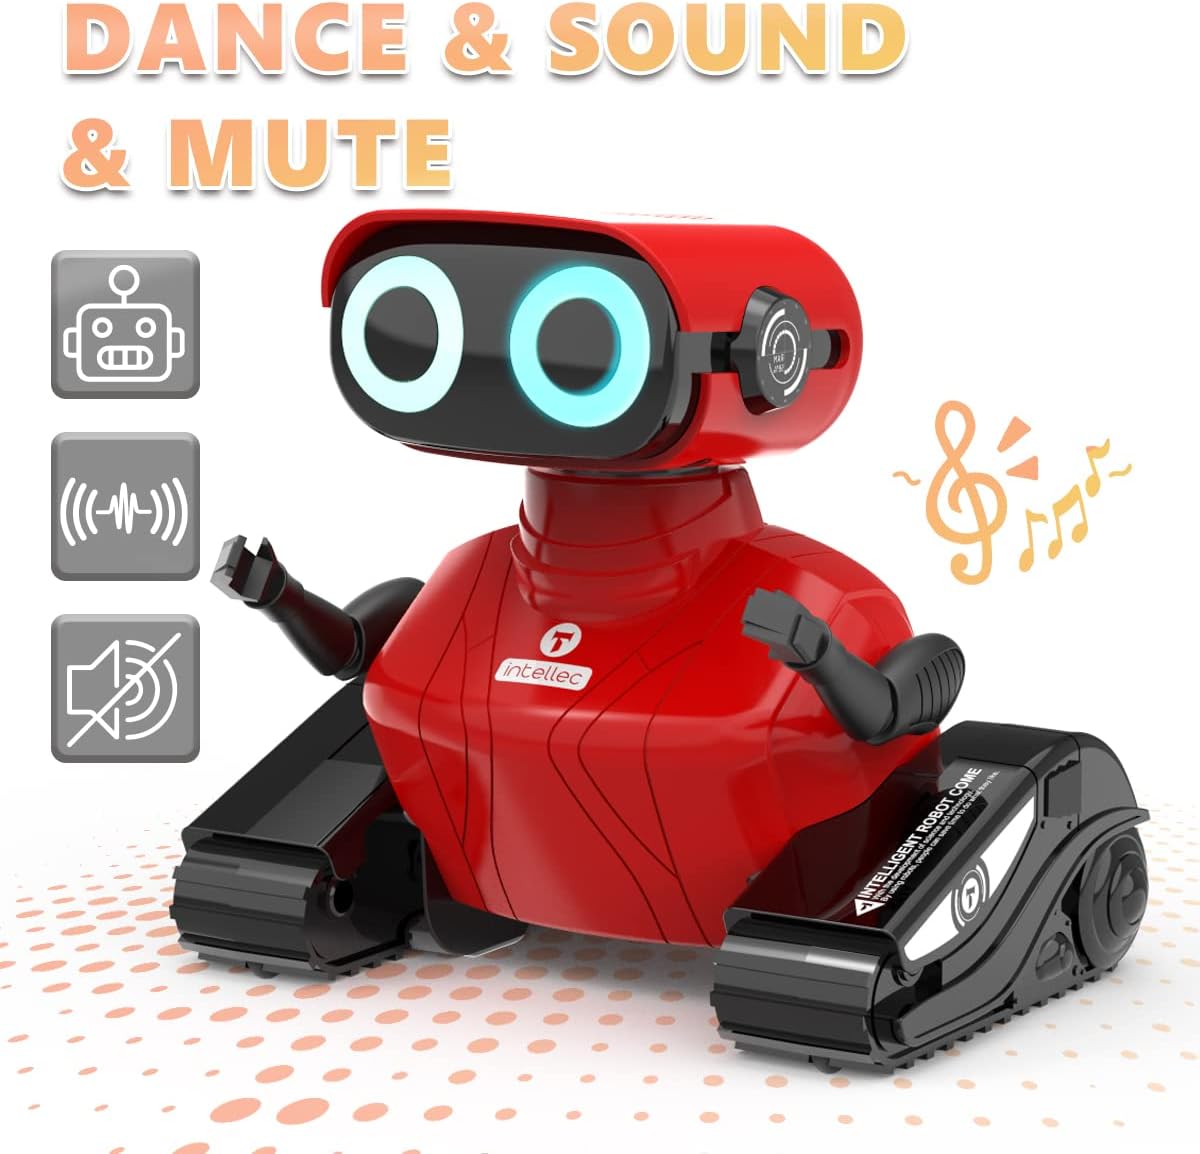 GILOBABY Robot Toys, Remote Control Robot Toy, RC Robots for Kids with LED Eyes, Flexible Head & Arms, Dance Moves and Music, Birthday Gifts for Girls Ages 3+ Years (Red)